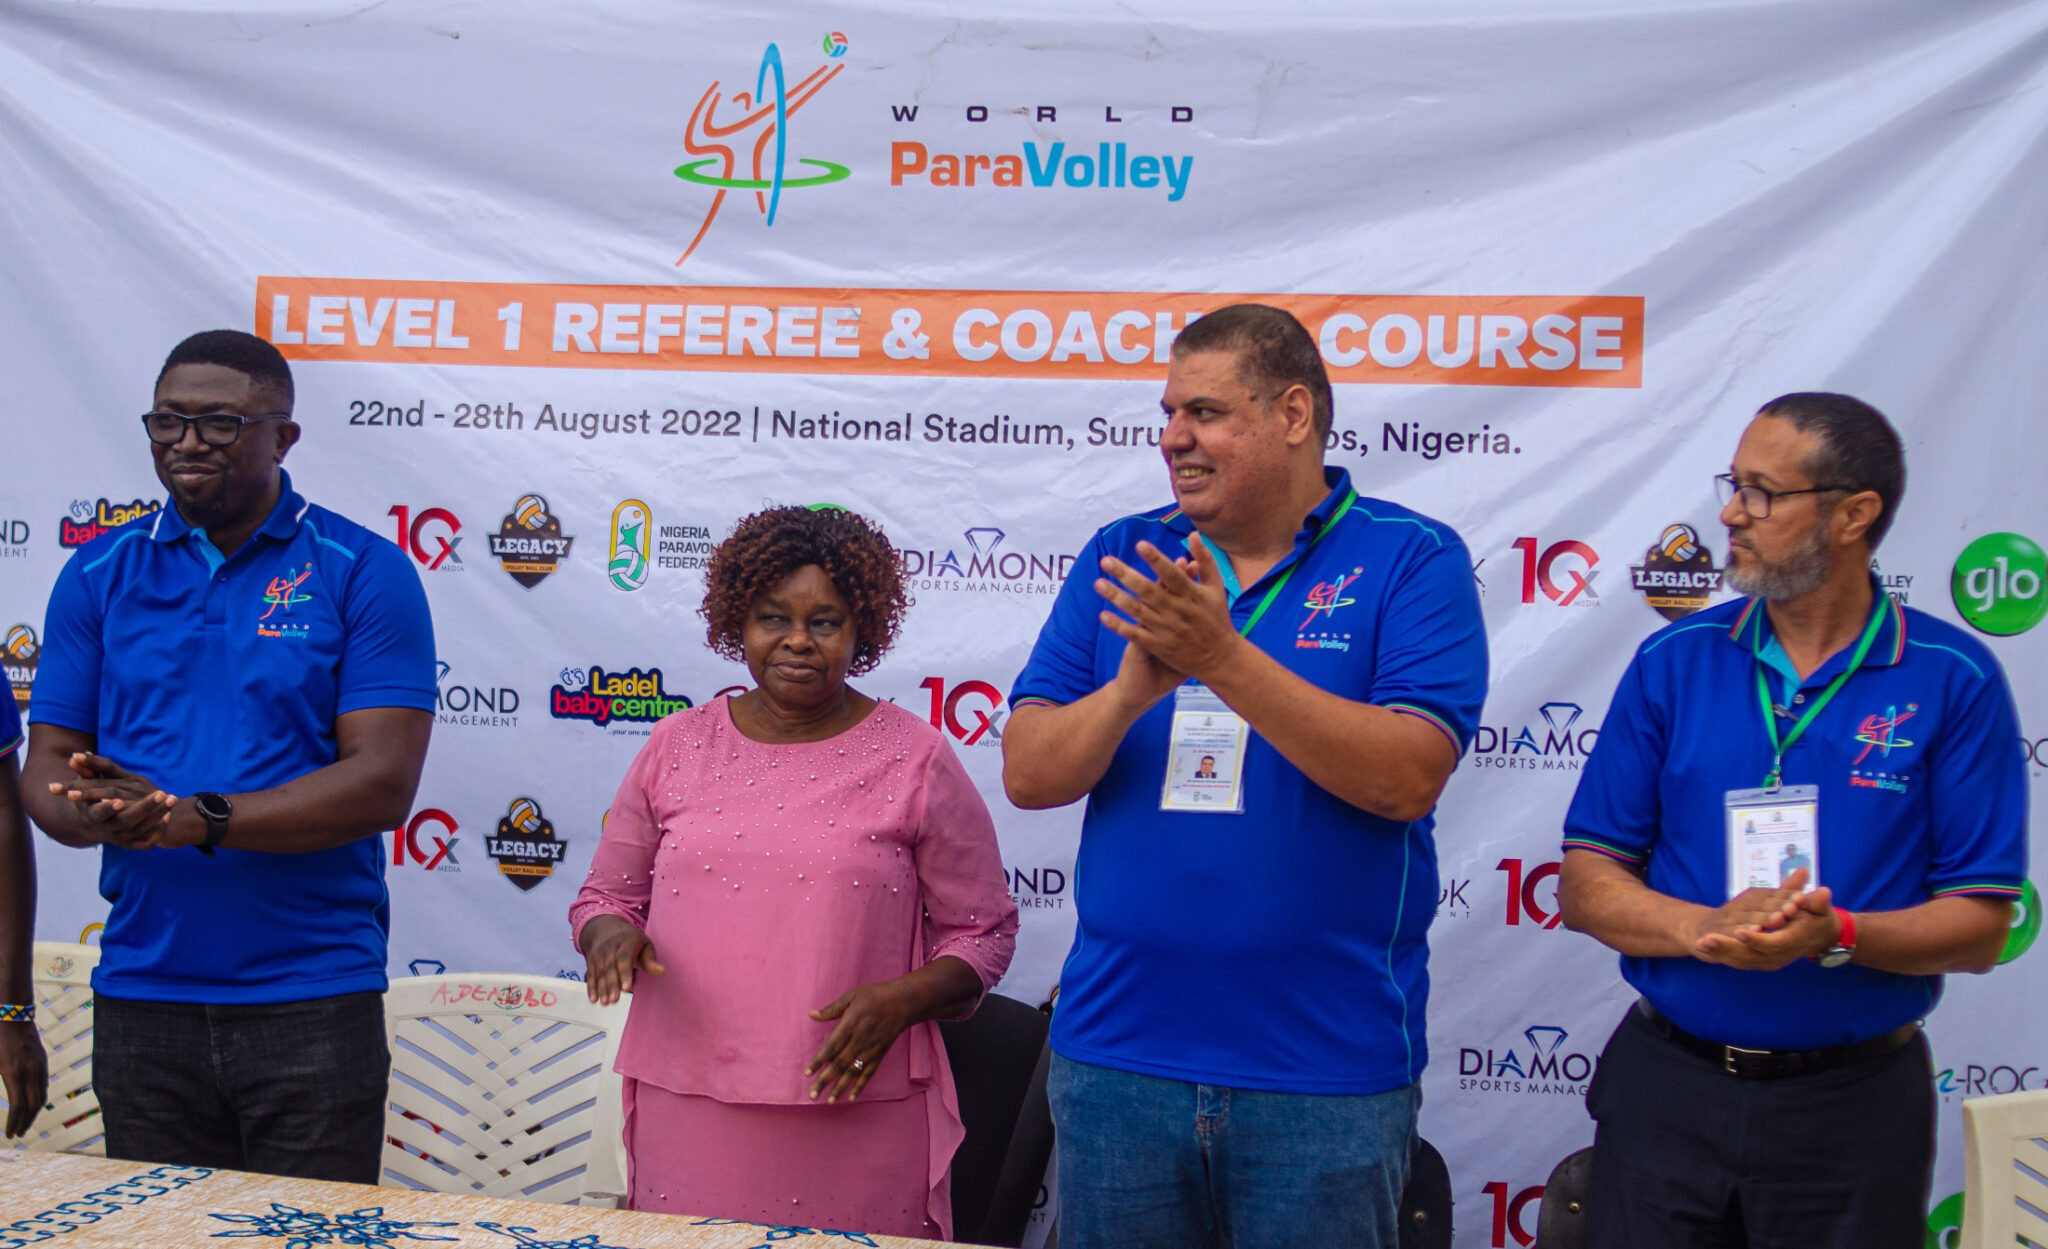 Nigeria is hosting the World ParaVolley course in Lagos ©World ParaVolley